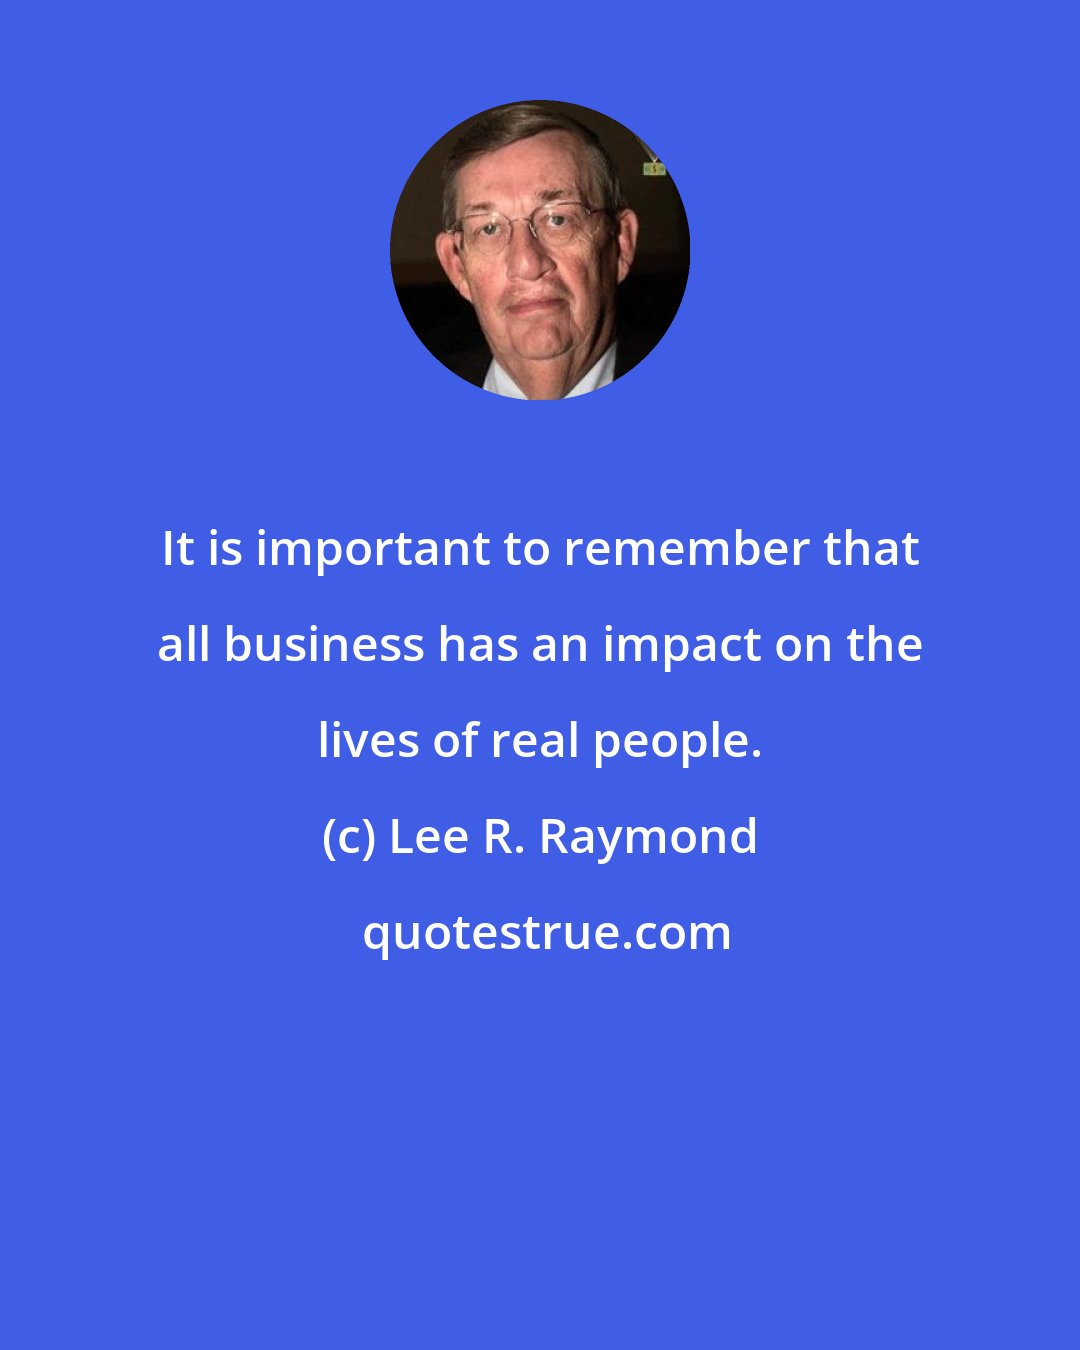 Lee R. Raymond: It is important to remember that all business has an impact on the lives of real people.